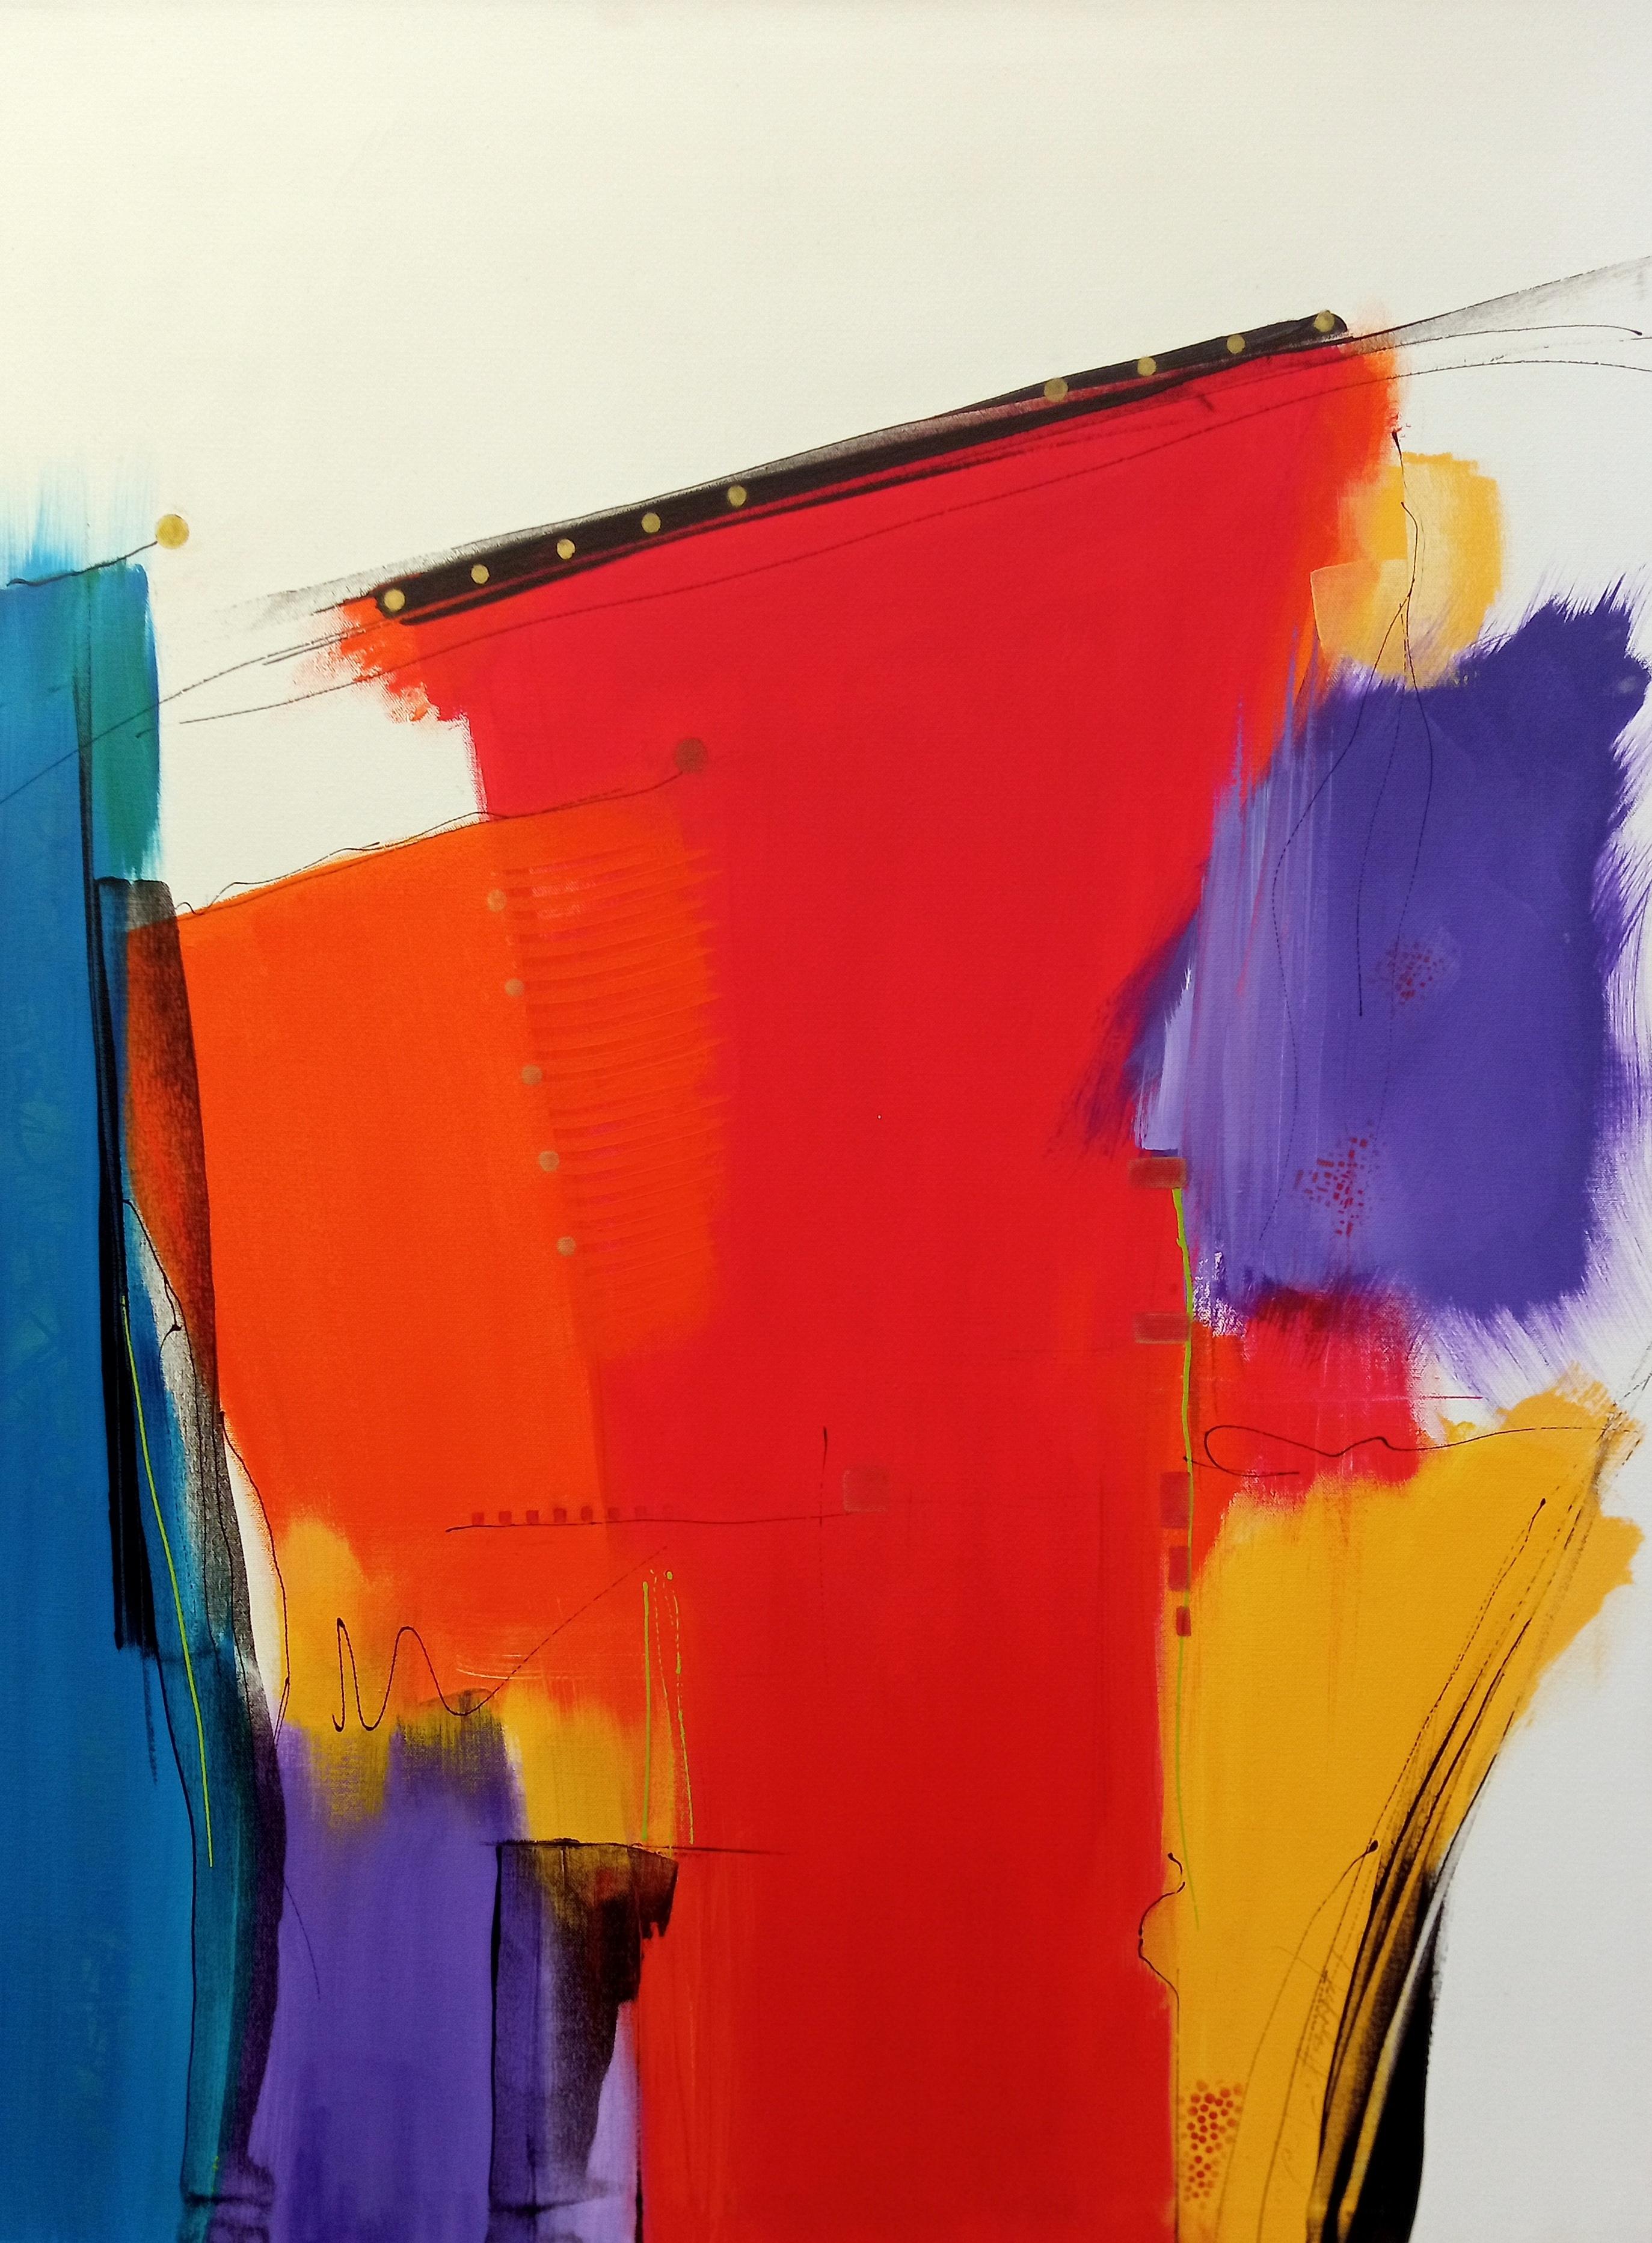 <p>Artist Comments<br />Part of artist Nicholas Foschi's series of abstract works exploring the colors of the mid-century modern era. In this composition, Nicholas creates a central pillar of red, flanked by orange, yellow, blue, and violet. "My